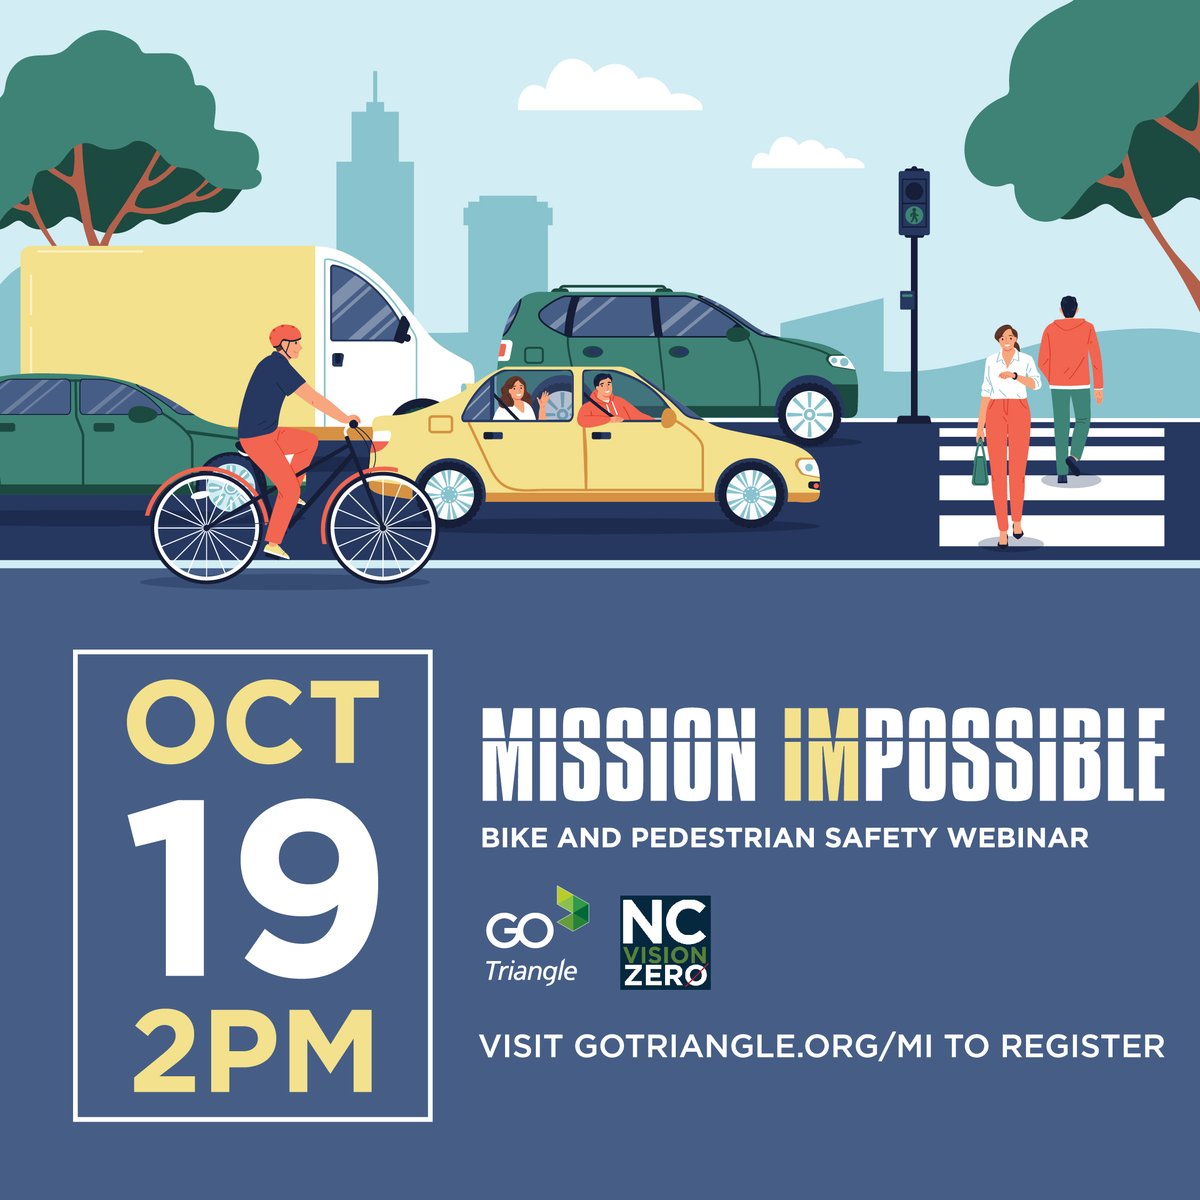 Join #GoTriangle and @NCVisionZero for the next installment of Mission imPossible! On October 19, we'll discuss bike and pedestrian safety around the Triangle. You don't want to miss this one!

Register today 👉 gotriangle.org/mi